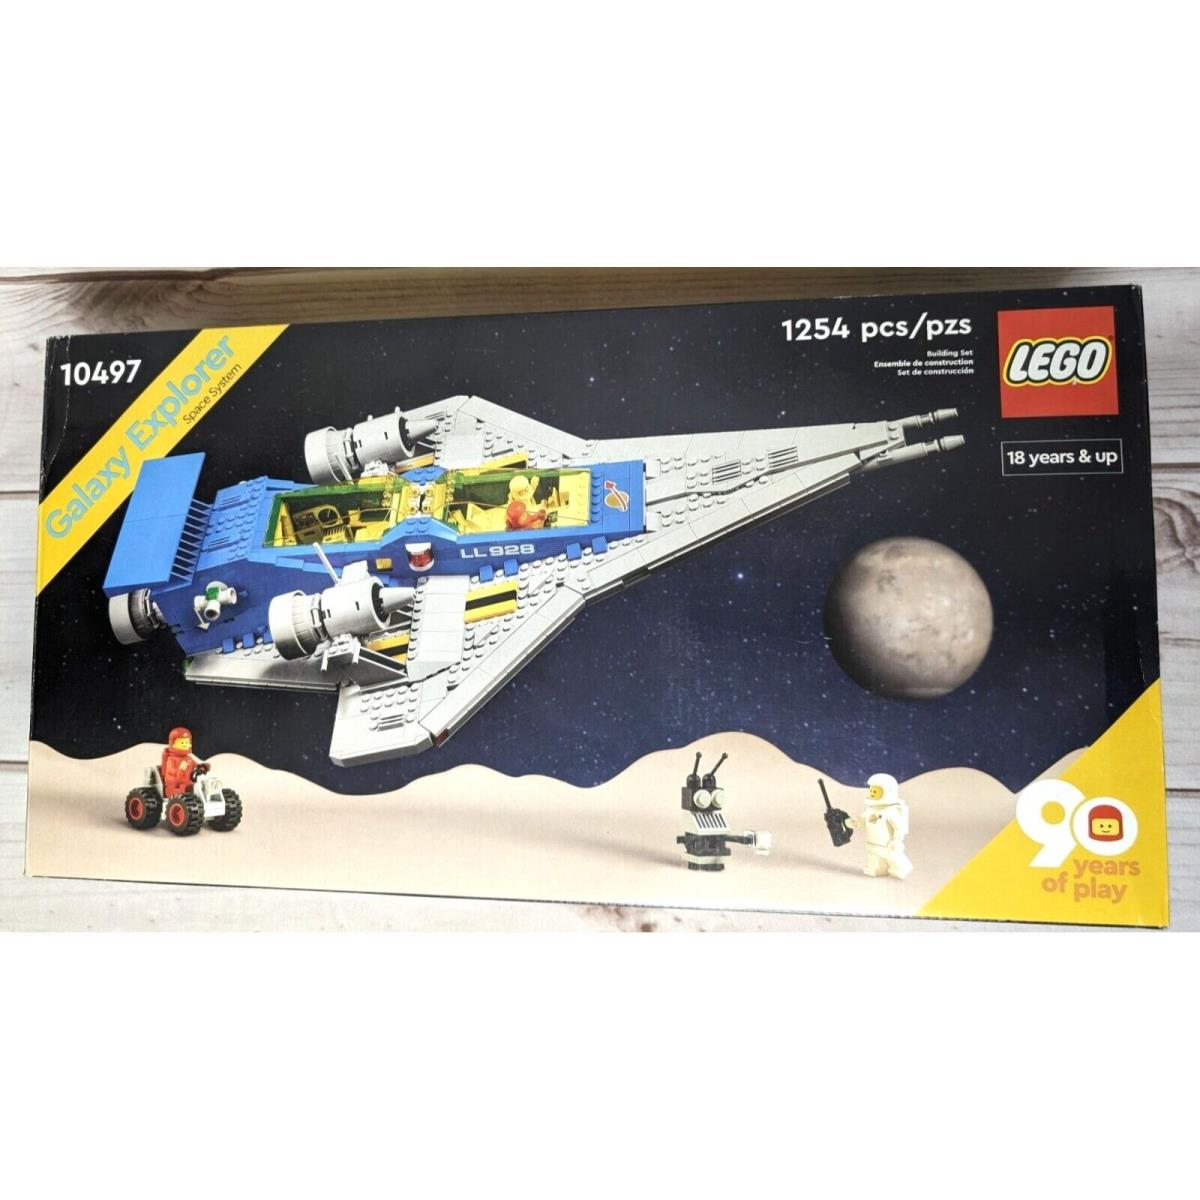 Lego Icons Galaxy Explorer Space System 1254 Piece 90th Anniversary 10497